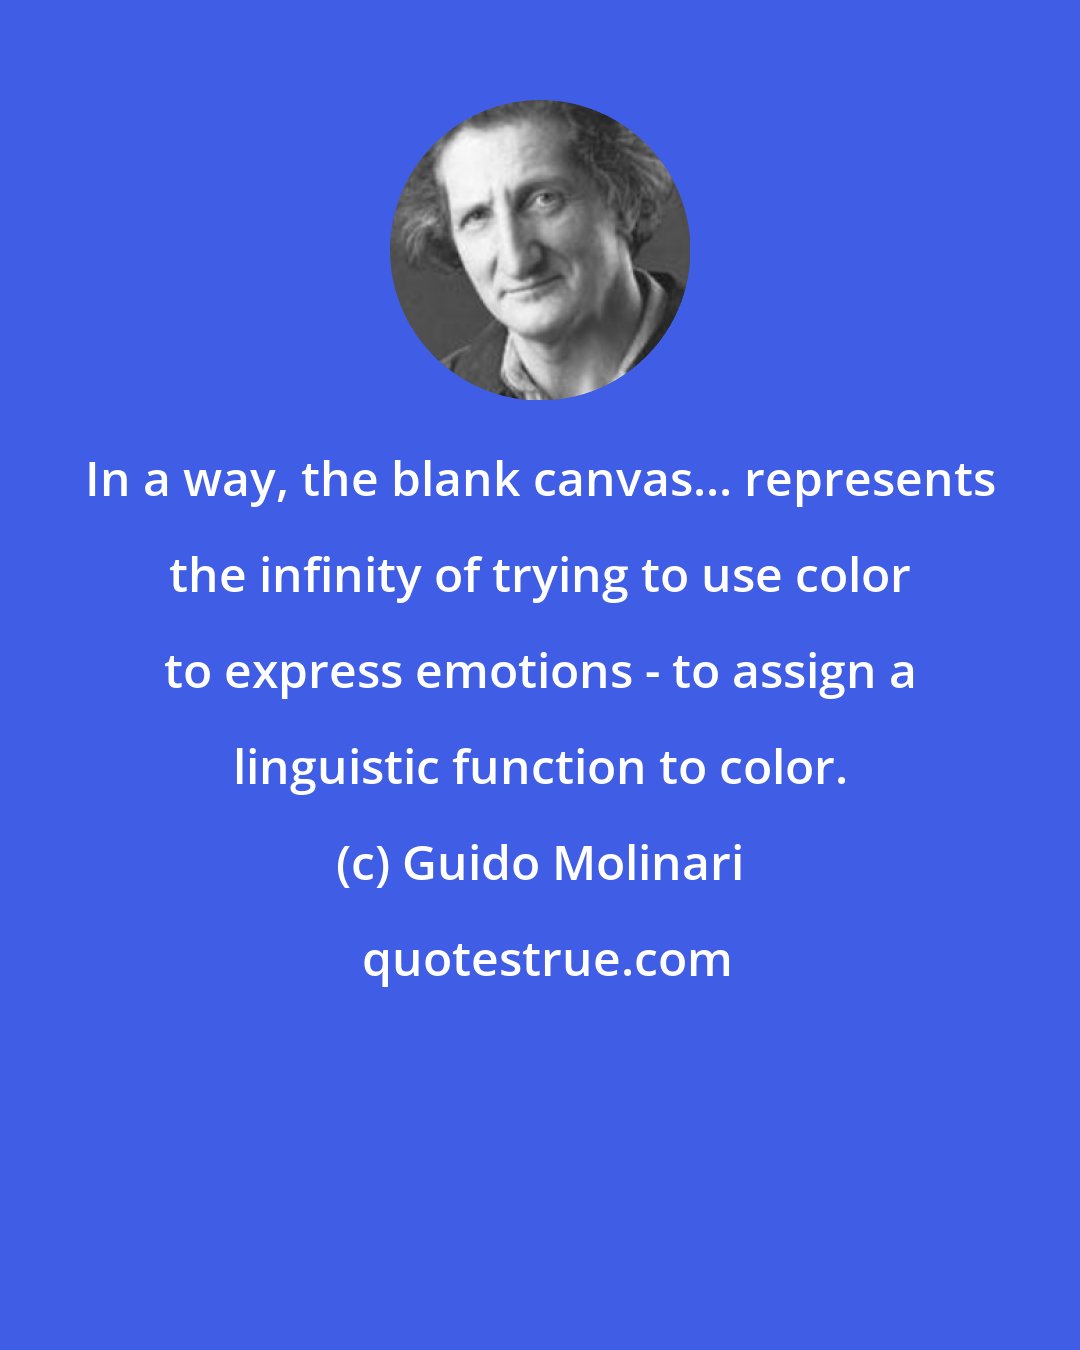 Guido Molinari: In a way, the blank canvas... represents the infinity of trying to use color to express emotions - to assign a linguistic function to color.